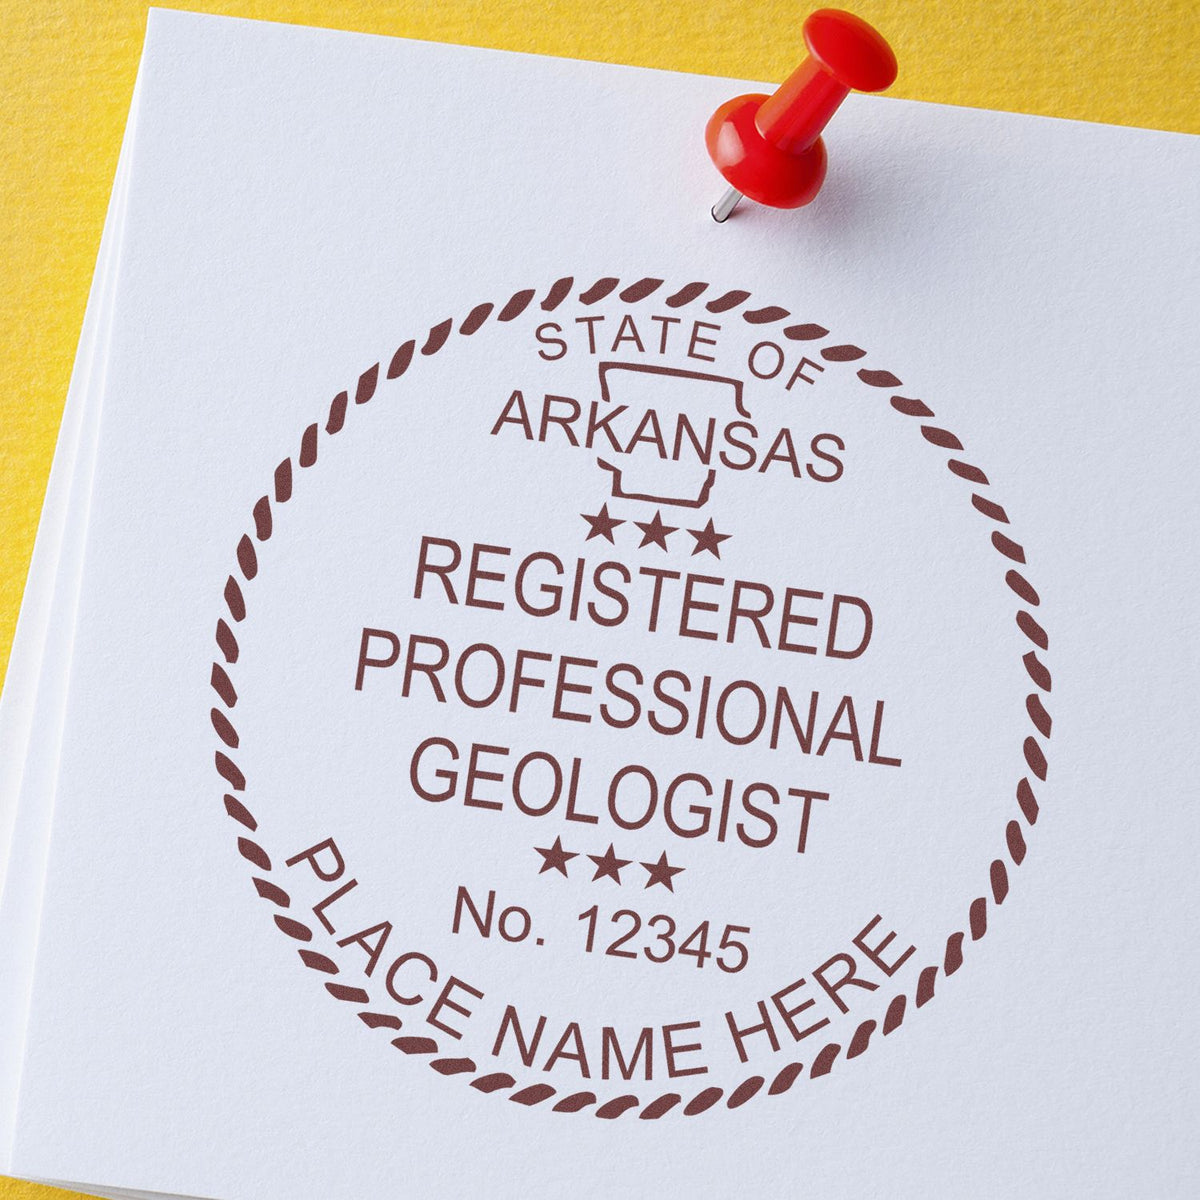 Another Example of a stamped impression of the Digital Arkansas Geologist Stamp, Electronic Seal for Arkansas Geologist on a office form